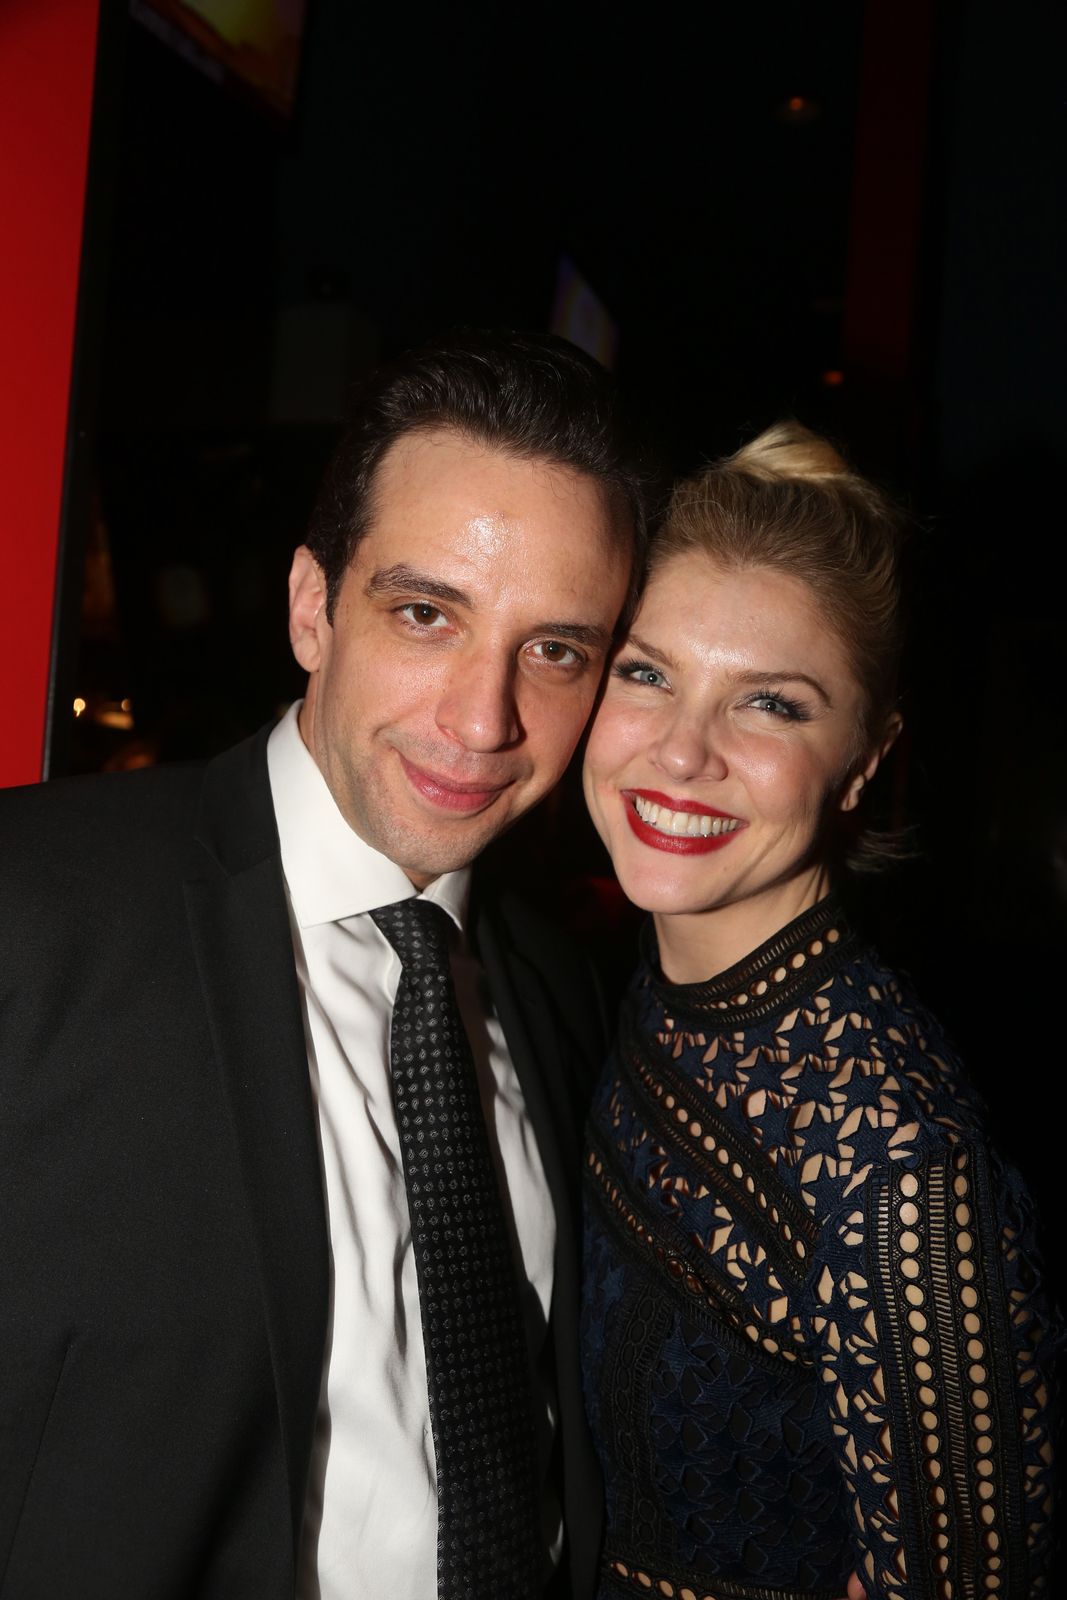 Nick Cordero and Amanda Kloots at the after-party for Manhattan Concert Production's Broadway Series "Crazy For You" One Night Only Production on February 19, 2017, in New York City | Photo: Bruce Glikas/FilmMagic/Getty Images